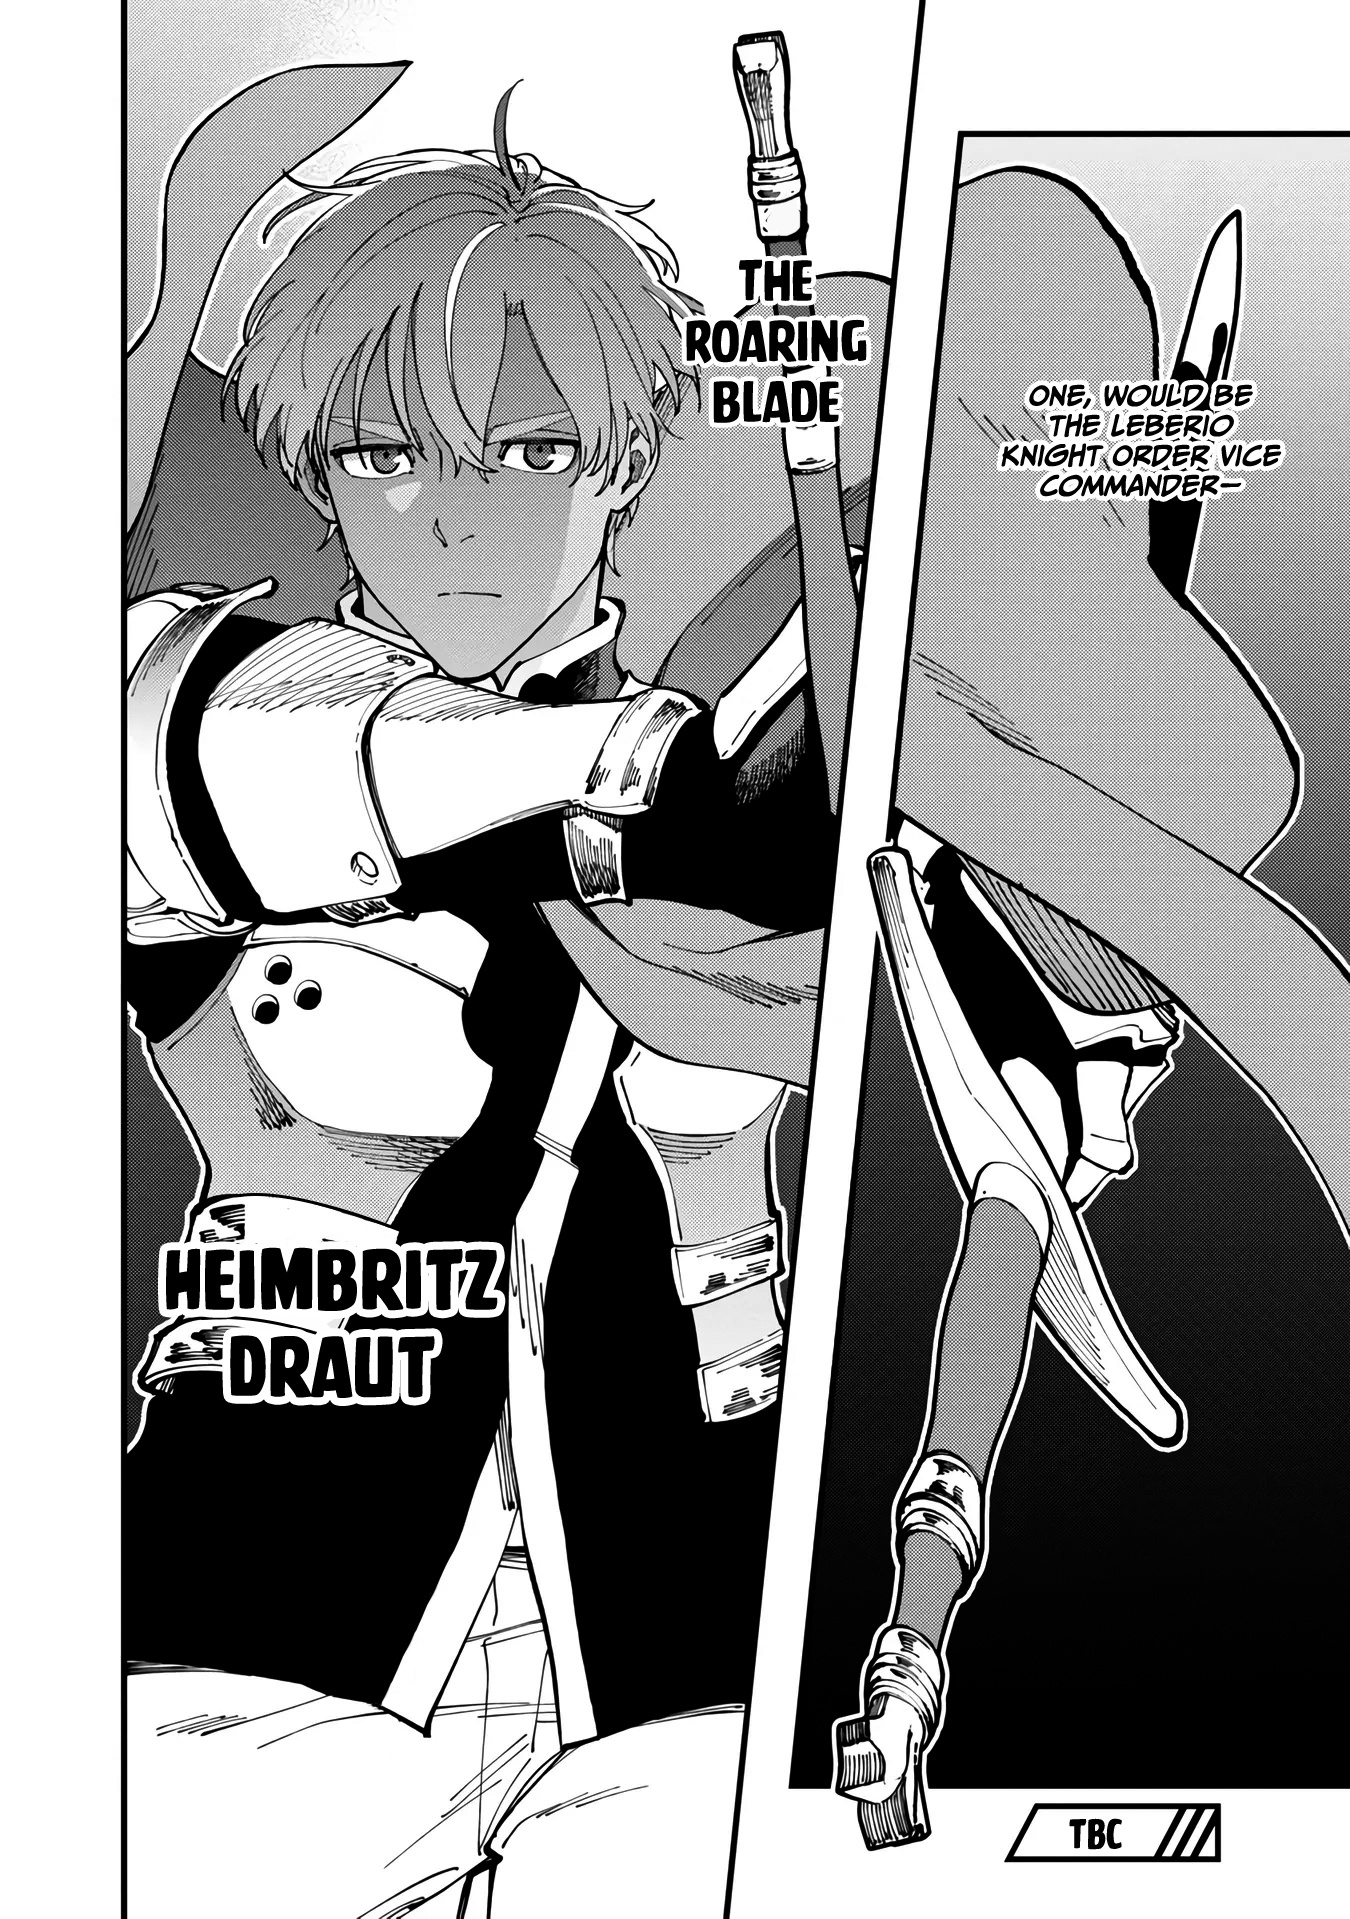 An Old Man From the Countryside Becomes a Swords Saint: I Was Just a Rural Sword Teacher, but My Successful Students Won't Leave Me Alone! Vol.4 Chapter 18: Old Man Became The Topic Of Rumours!